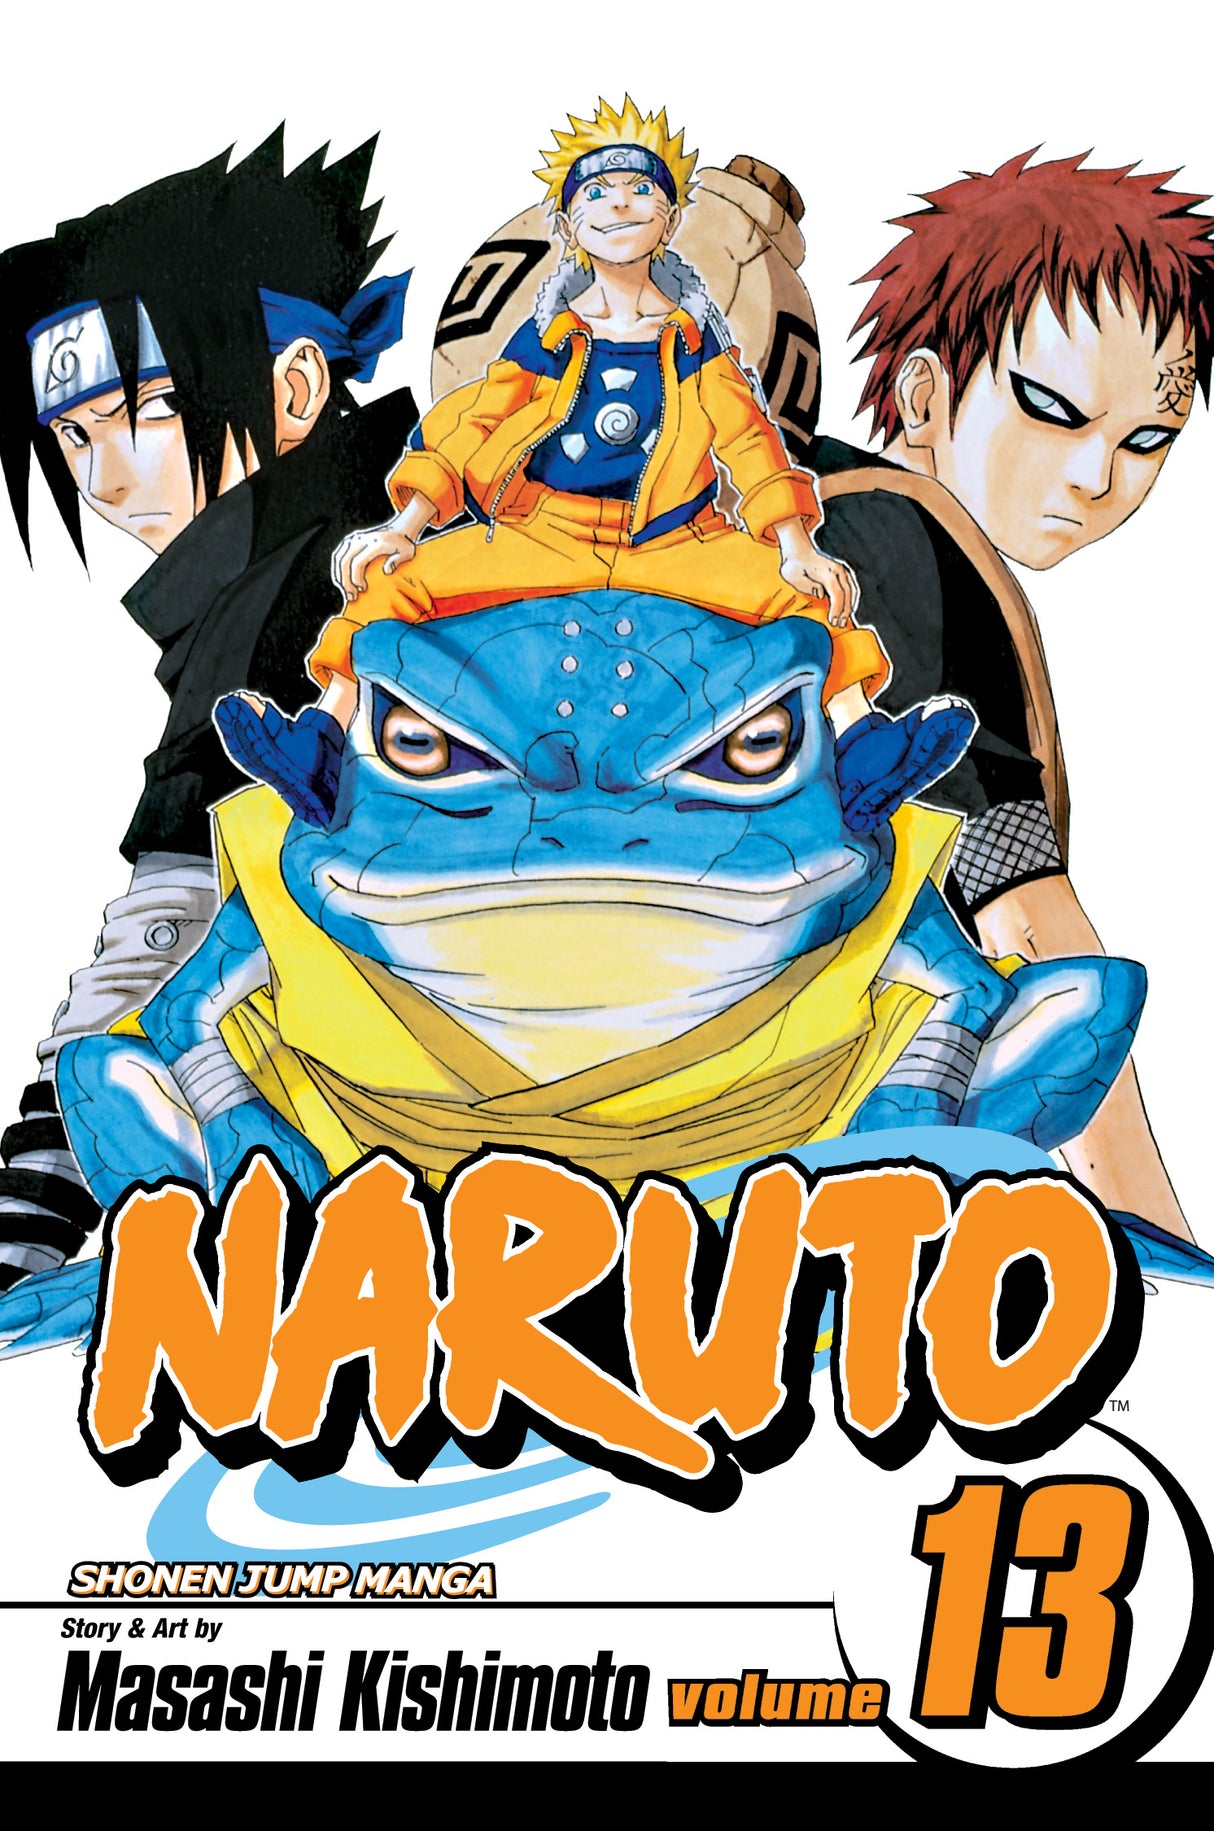 Cover image of the Manga Naruto, Vol.13: The Chûnin Exam, Concluded...!!